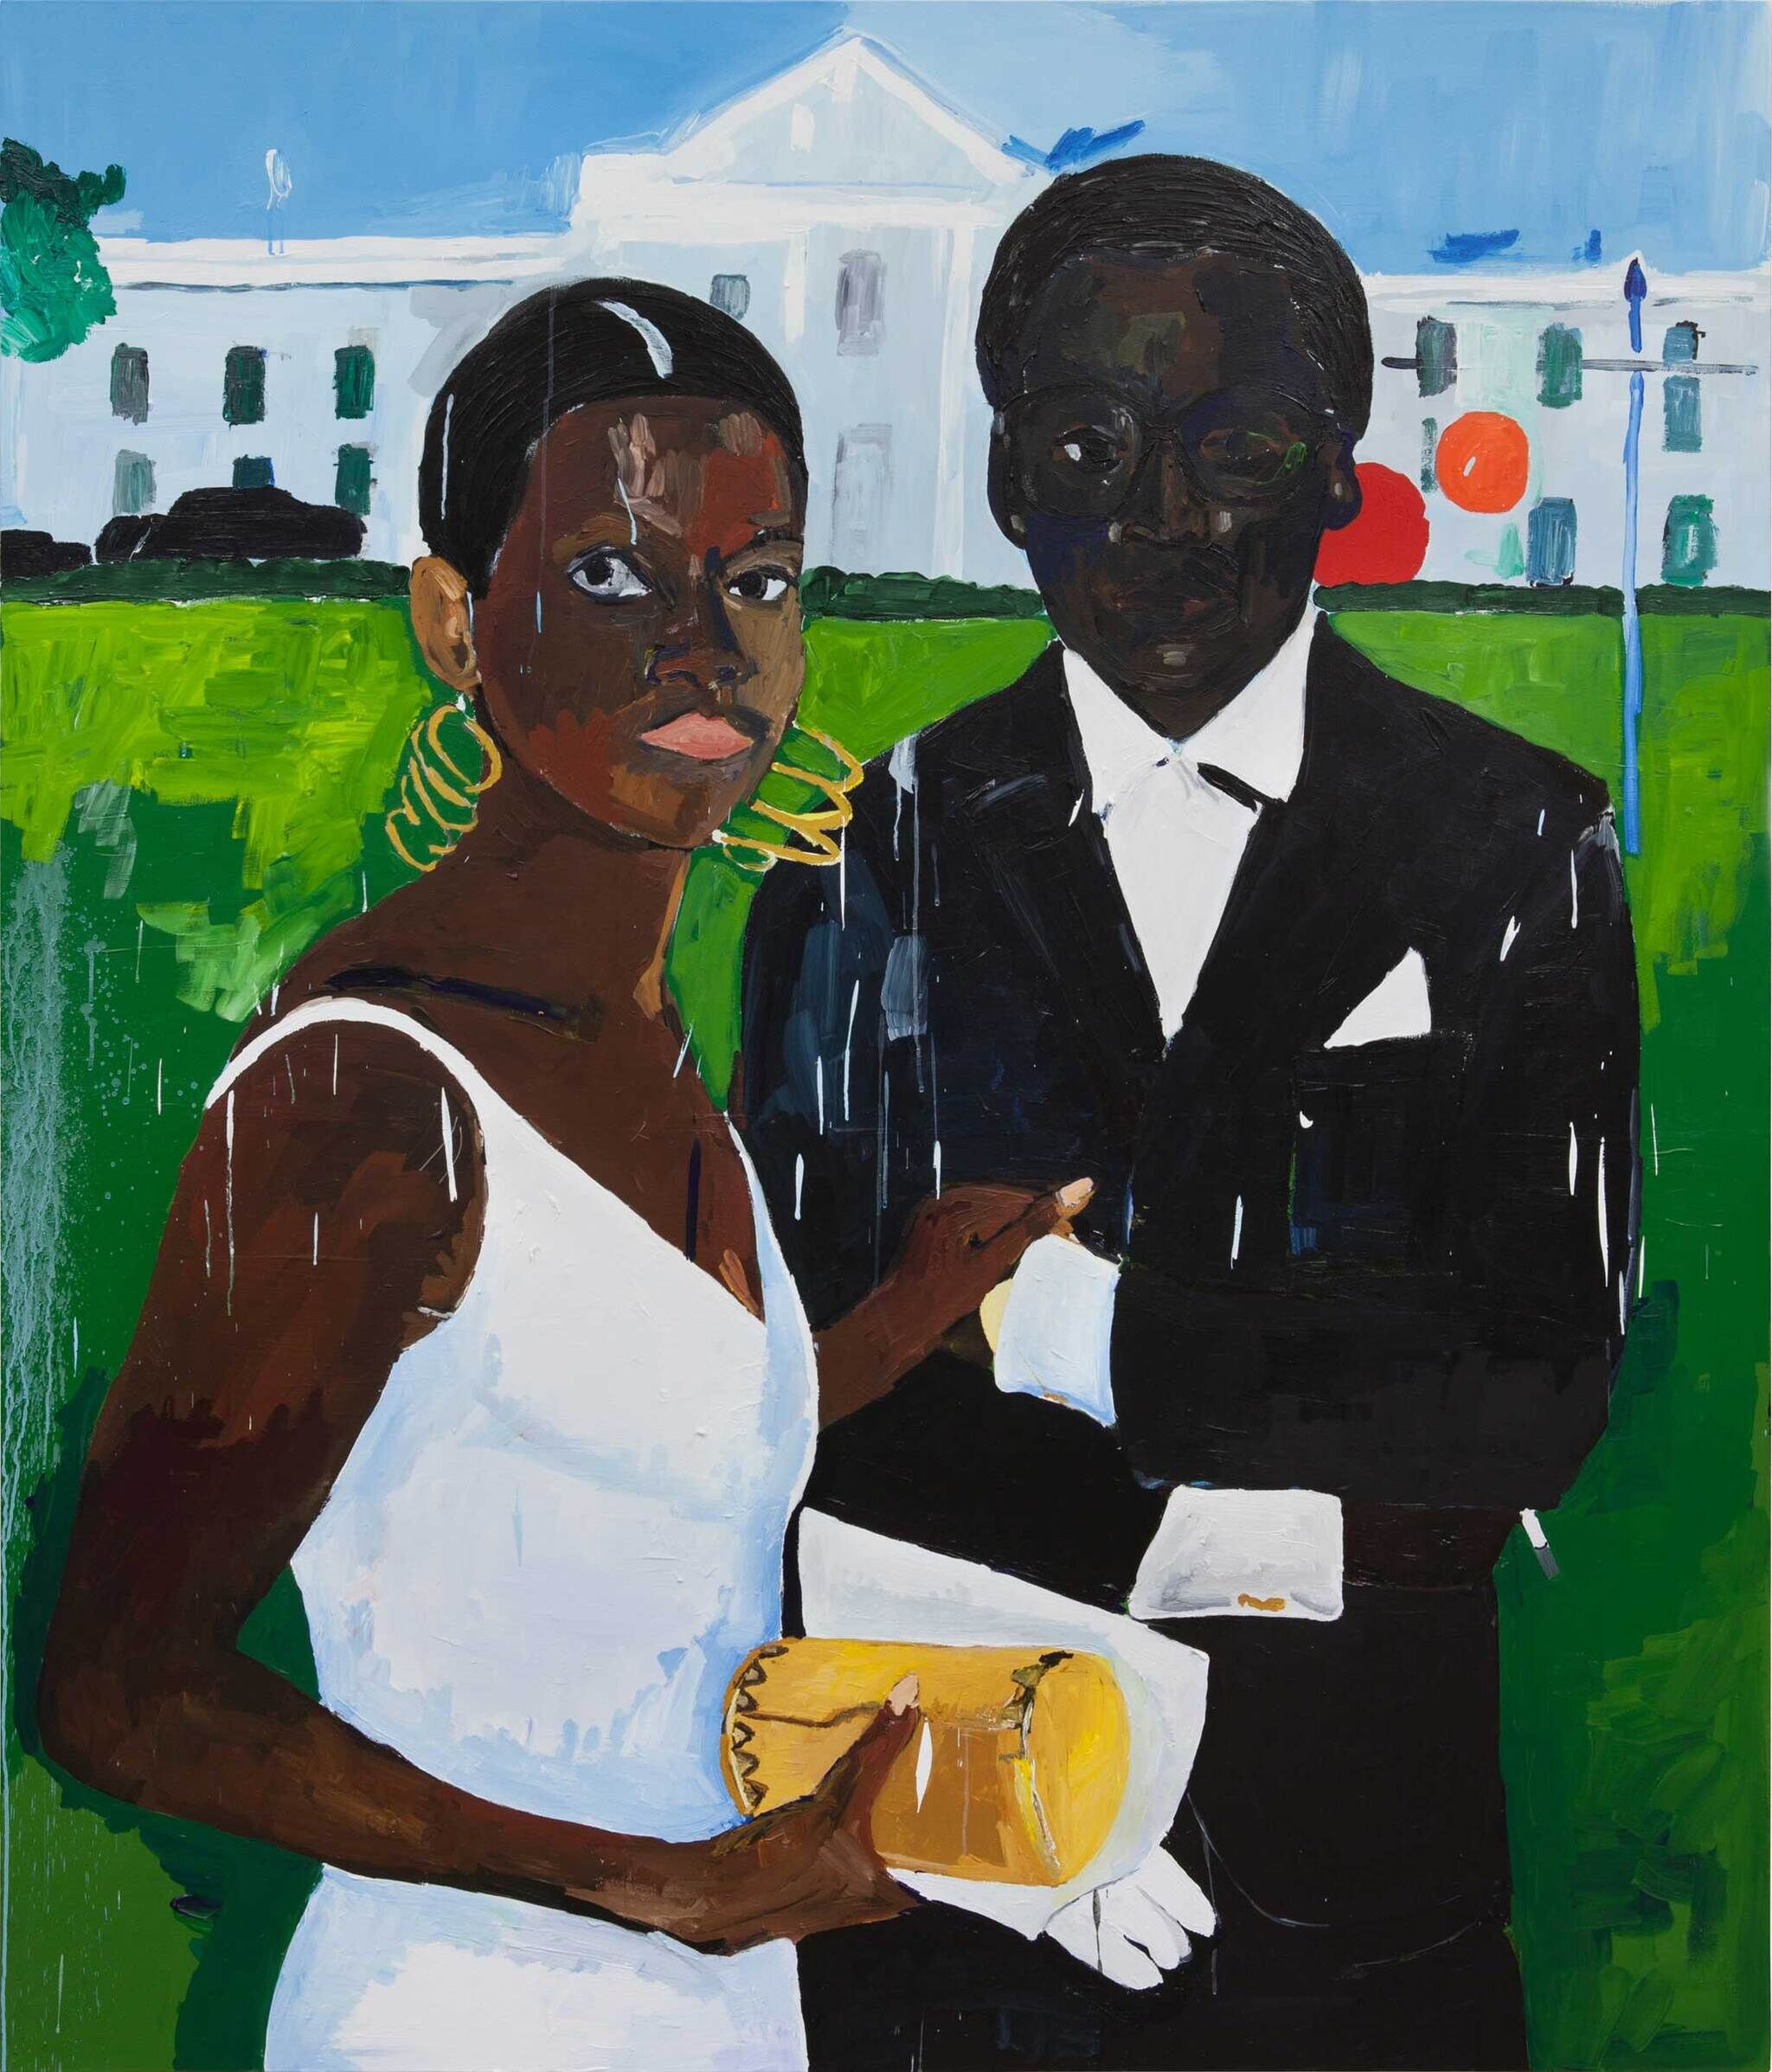 A Black woman in a white dress holding a yellow clutch stands with a Black man in a suit in front of the White House.